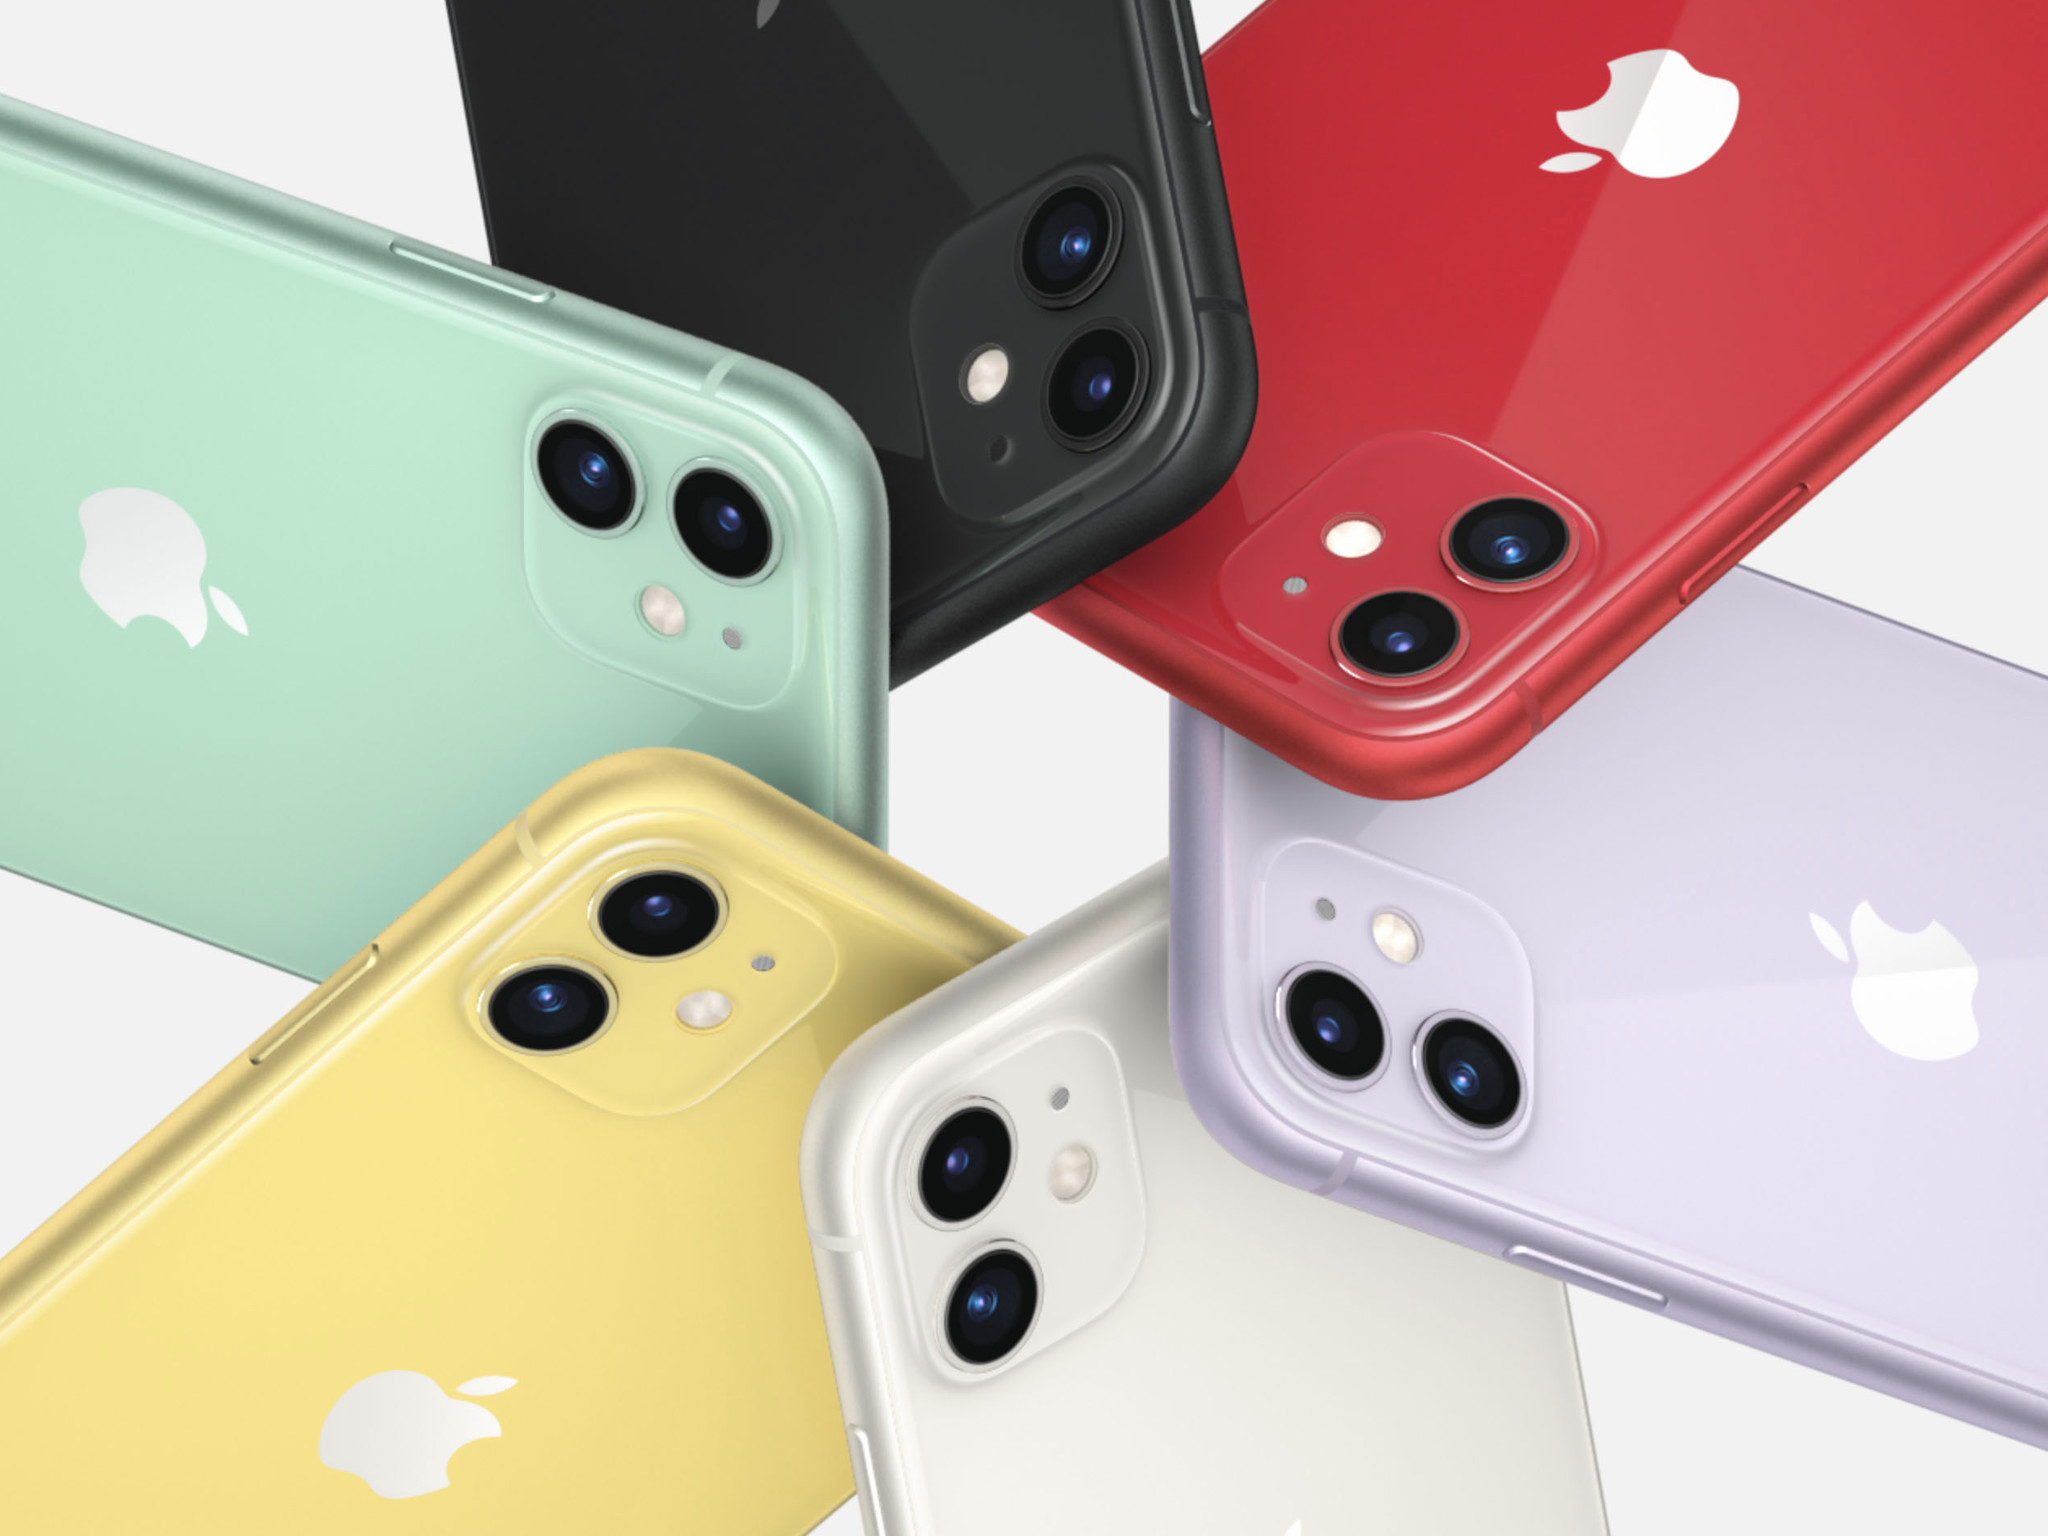 Apple iPhone 11 colors